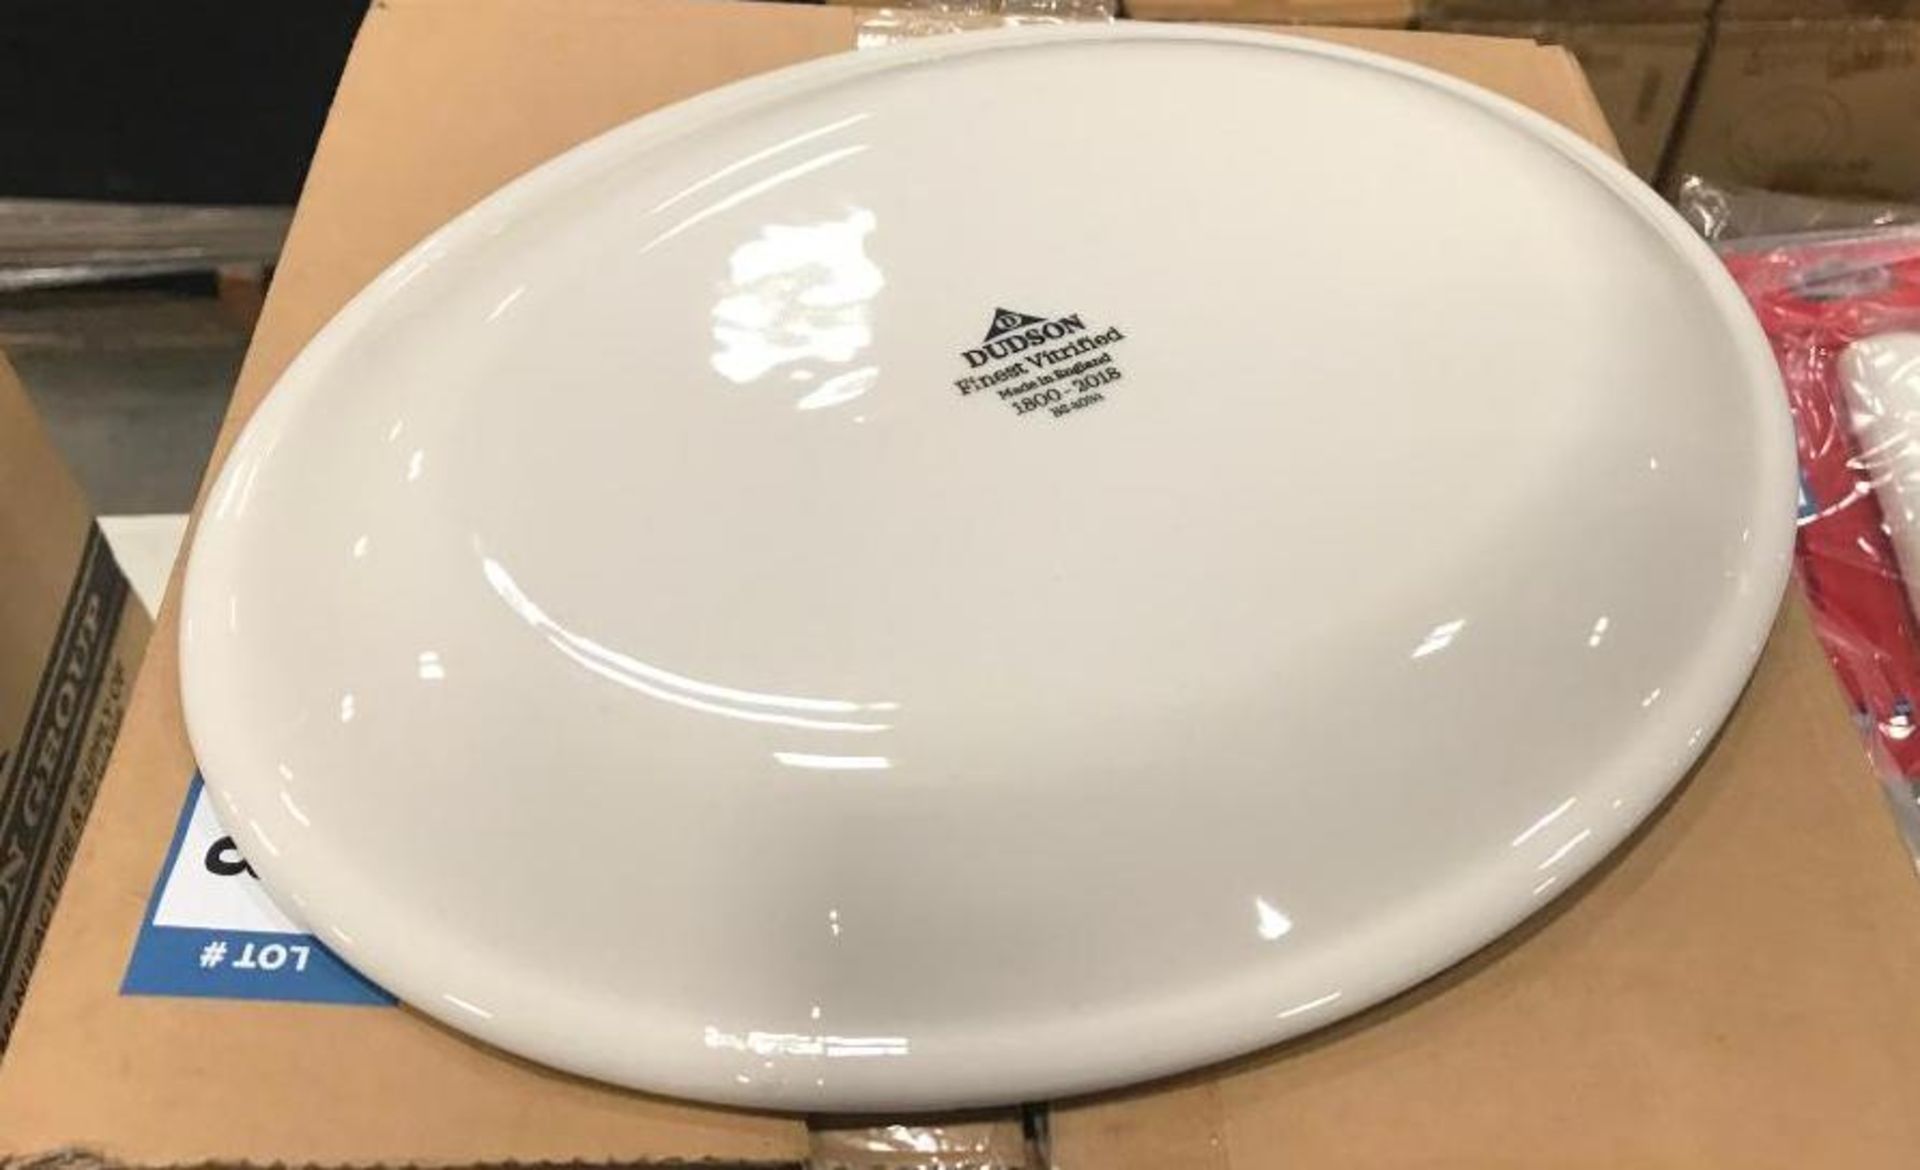 DUDSON CLASSIC OVAL PLATTER 10.5" - 24/CASE, MADE IN ENGLAND - Image 3 of 3